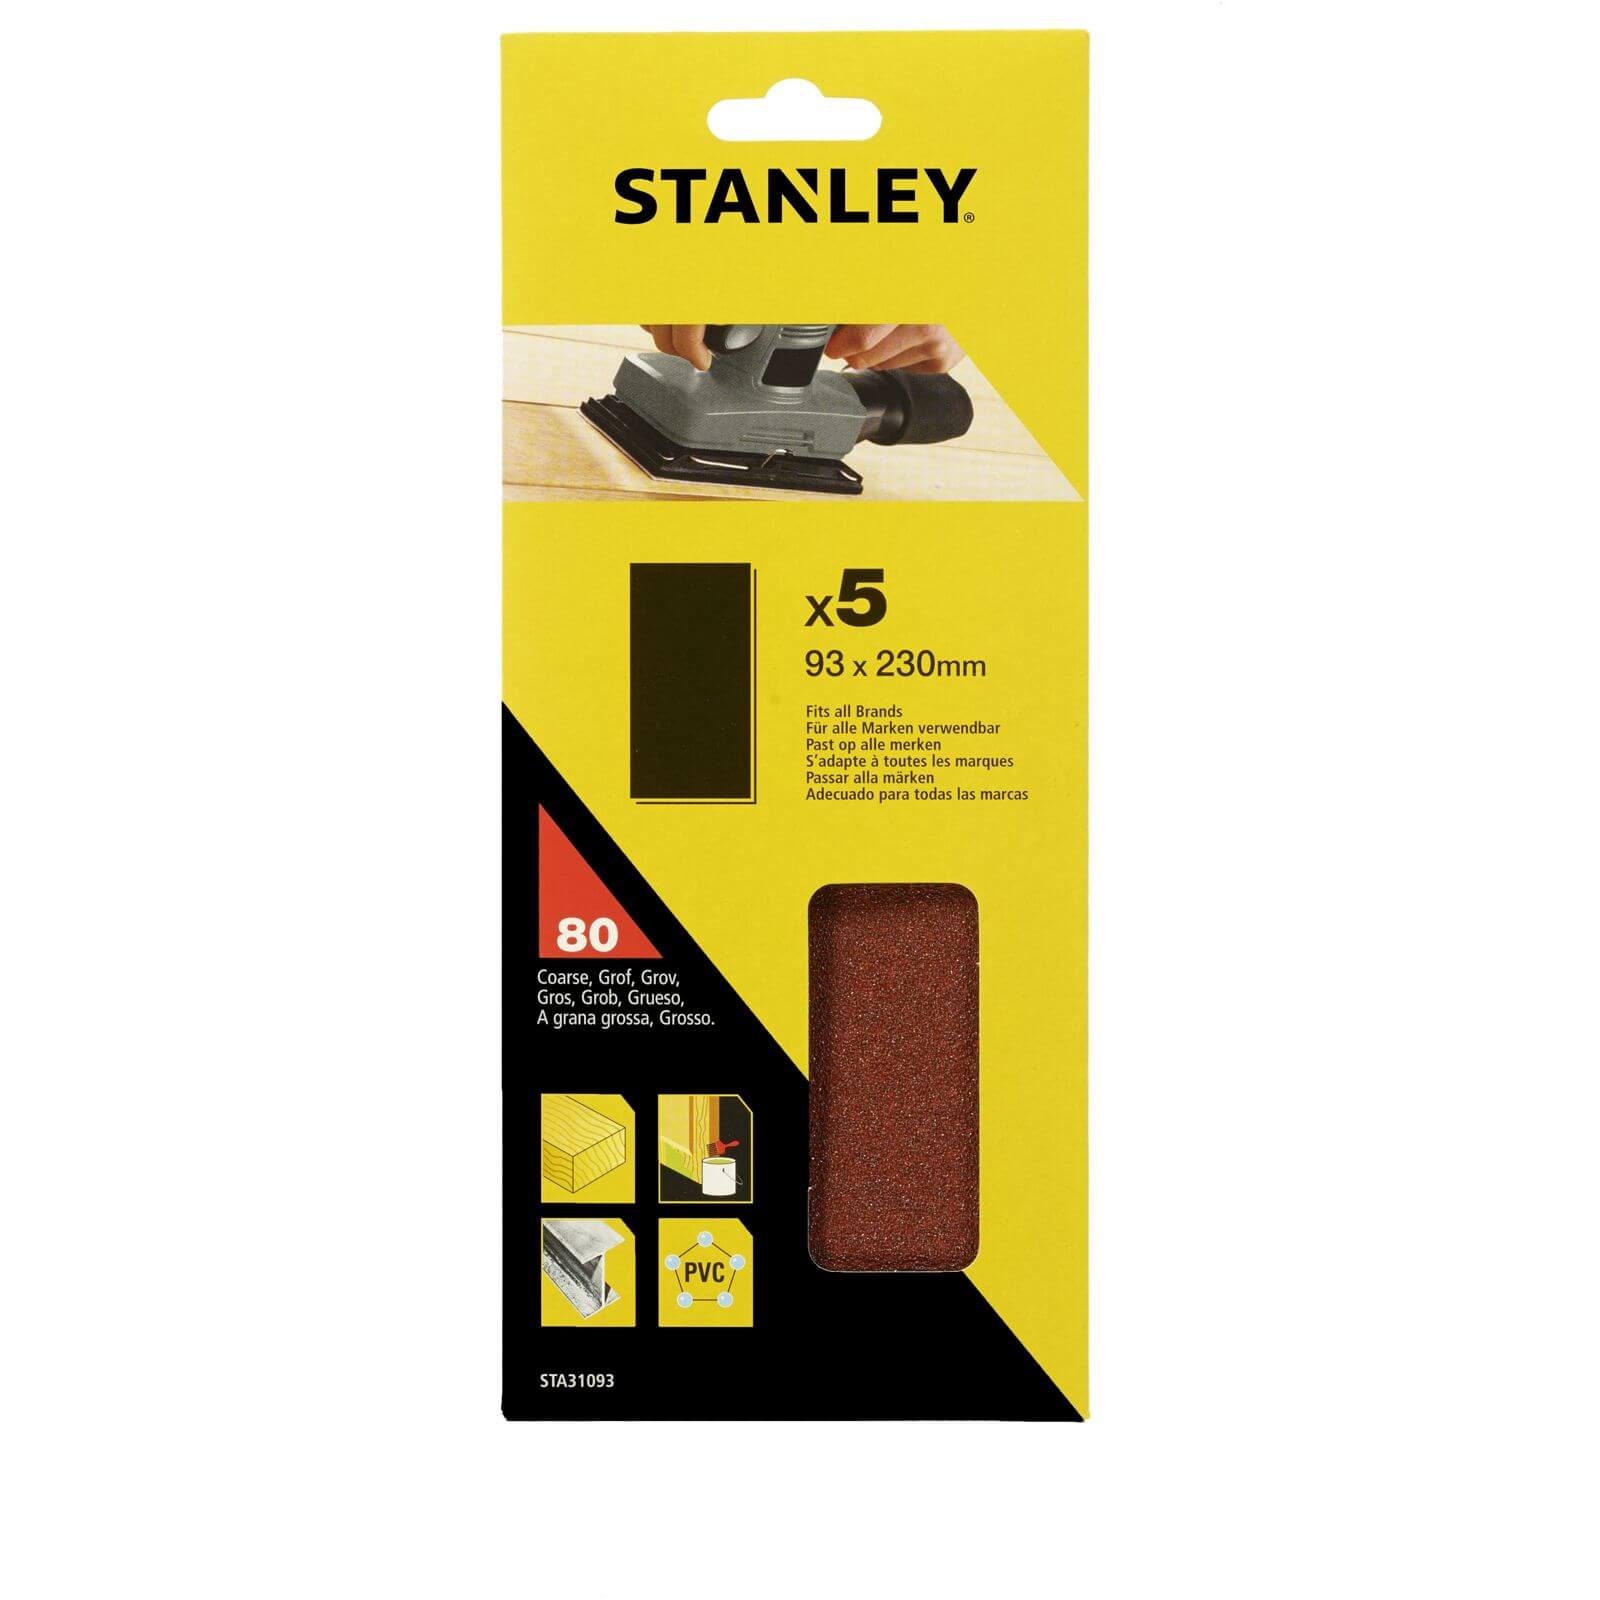 Photo of Stanley 1/3 Sheet Sander Unpunched Wire Clip 80g Sanding Sheets - Sta31093-xj